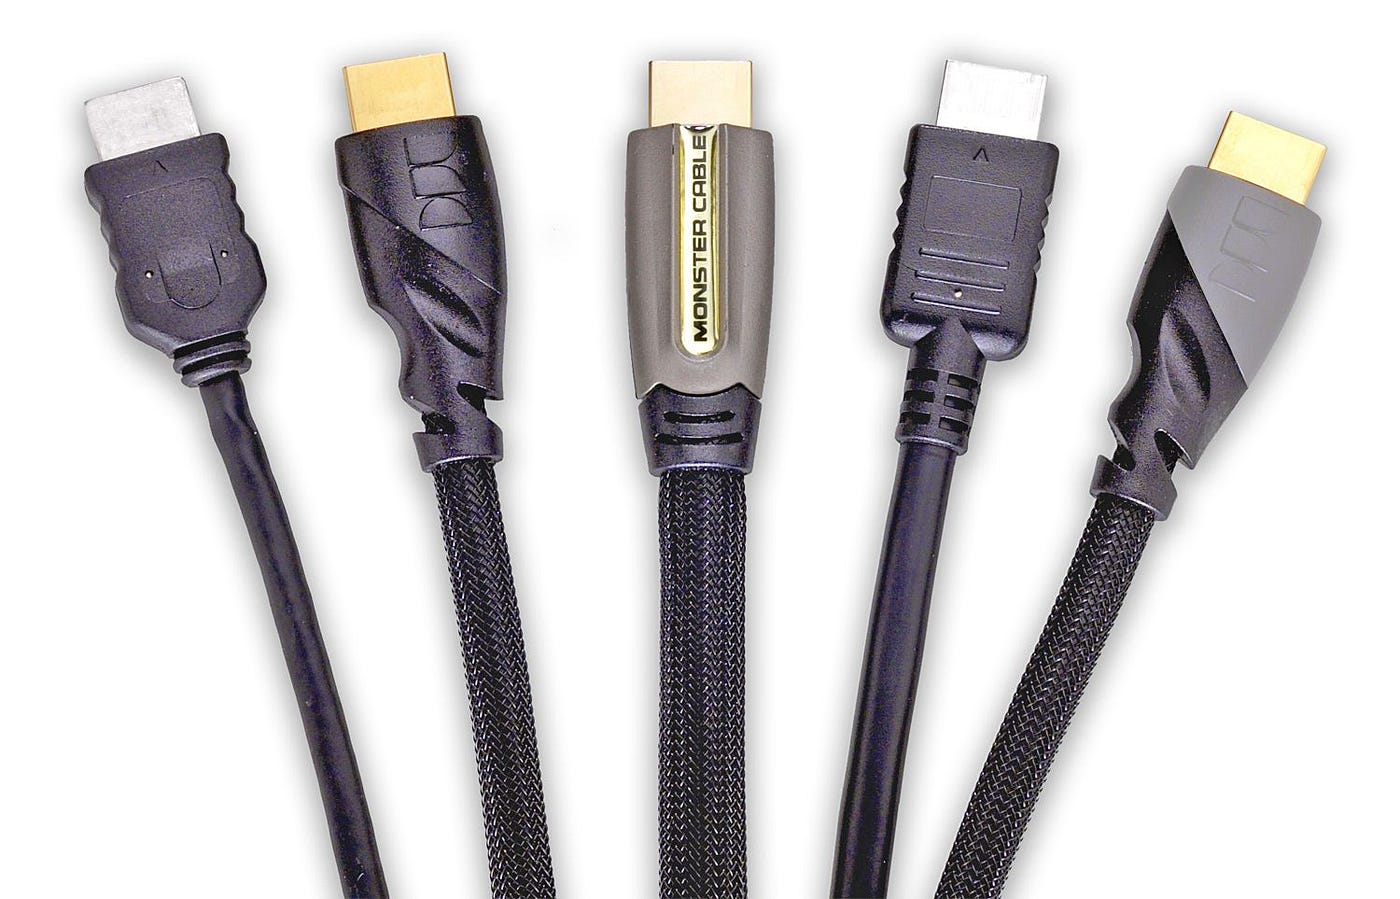 Getting To Know HDMI Cables, The Ultimate Guide, by Alyssamathews